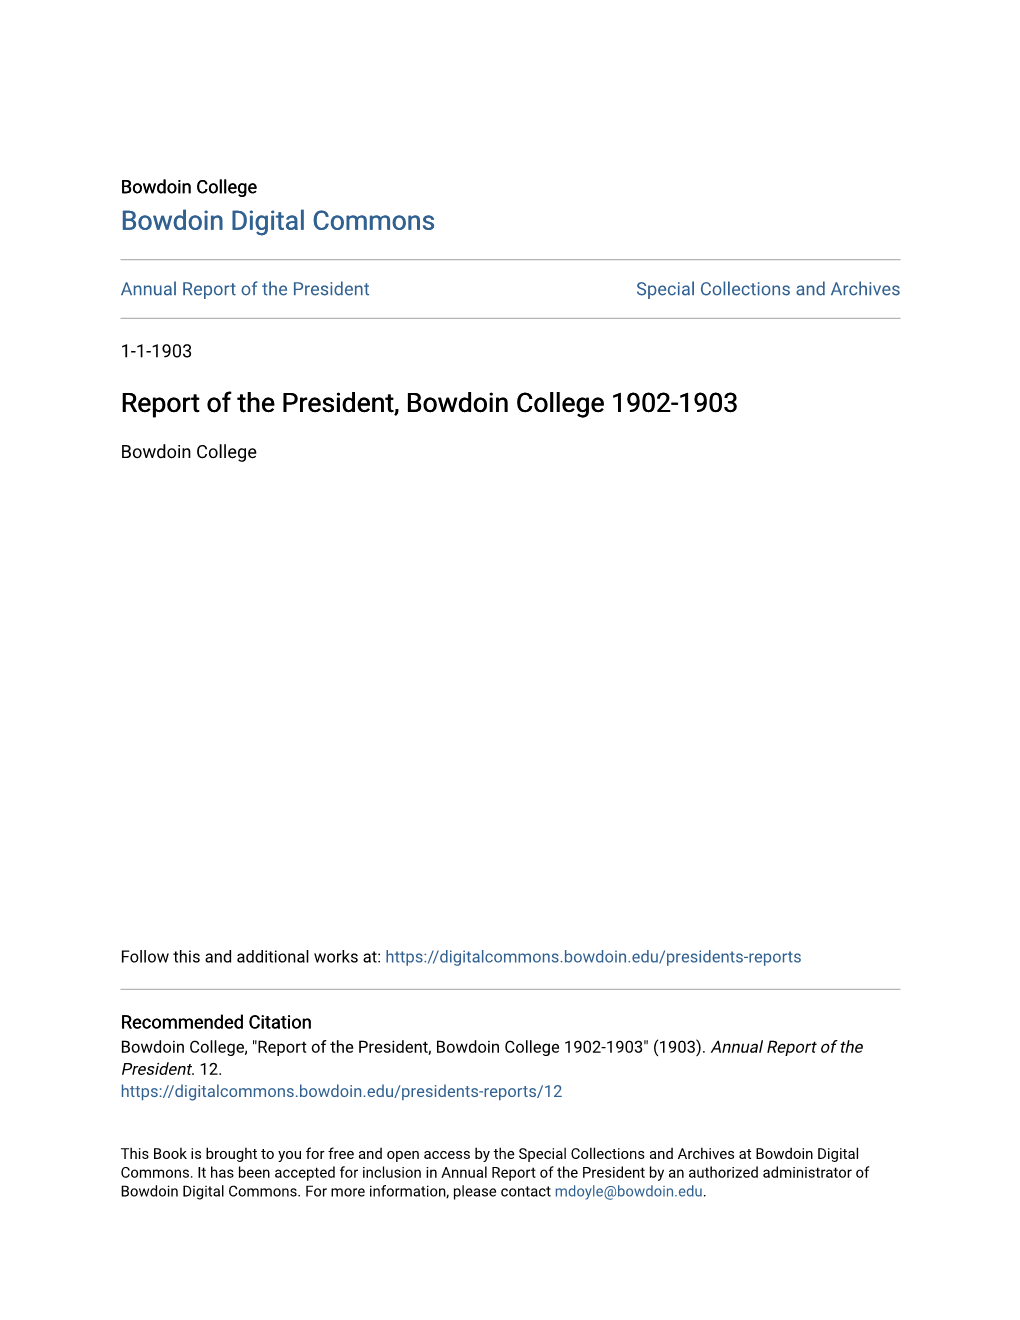 Report of the President, Bowdoin College 1902-1903